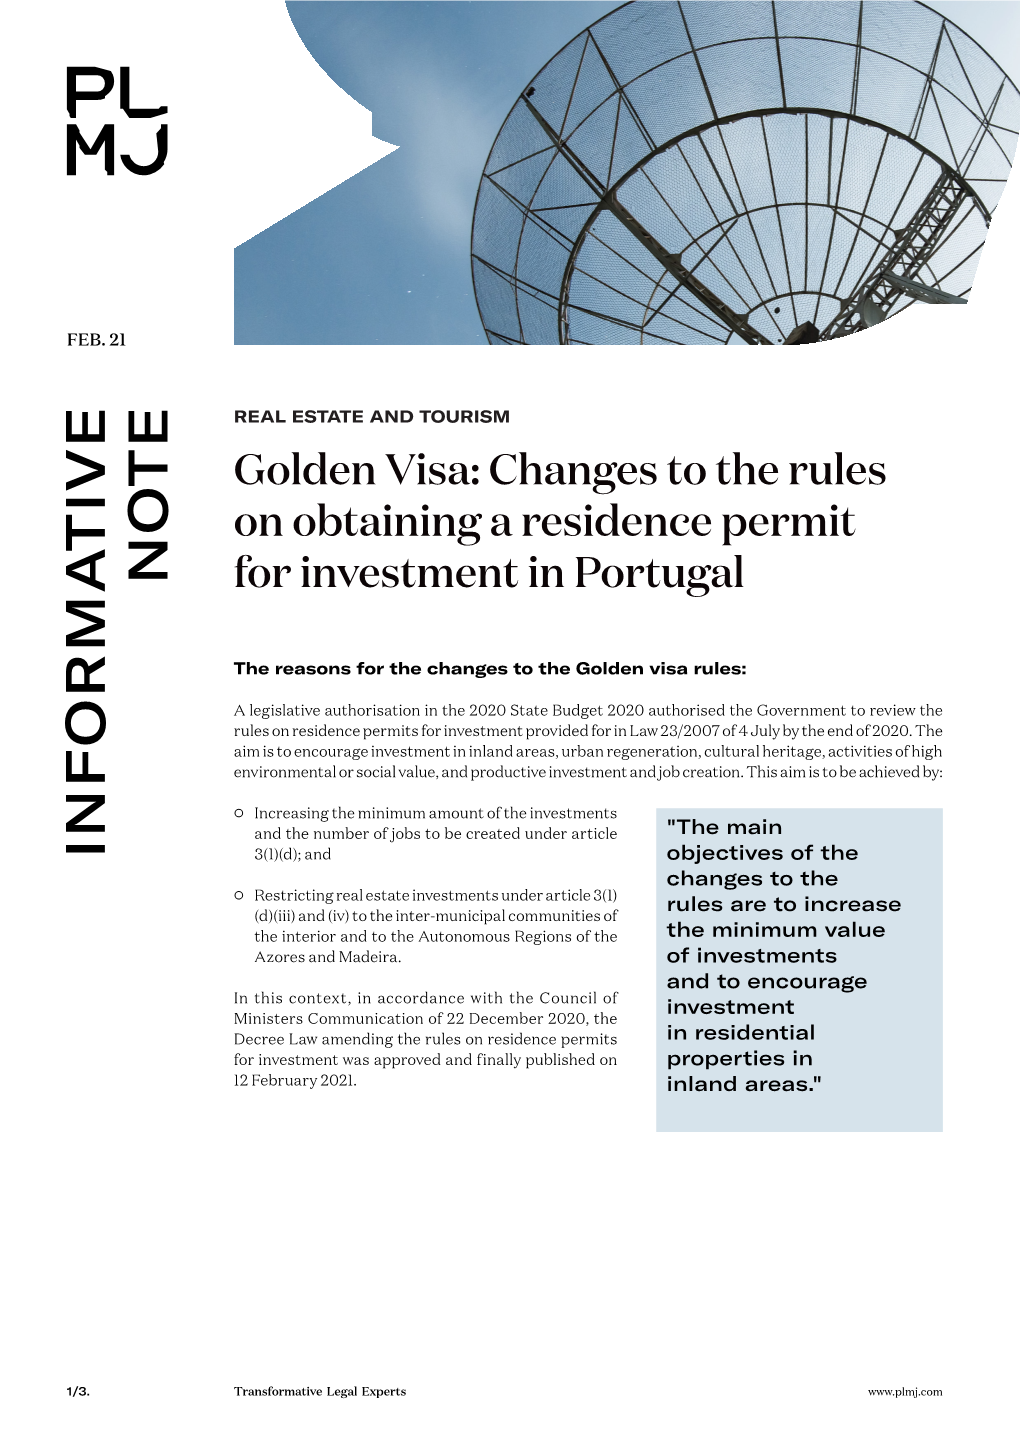 Golden Visa: Changes to the Rules on Obtaining a Residence Permit